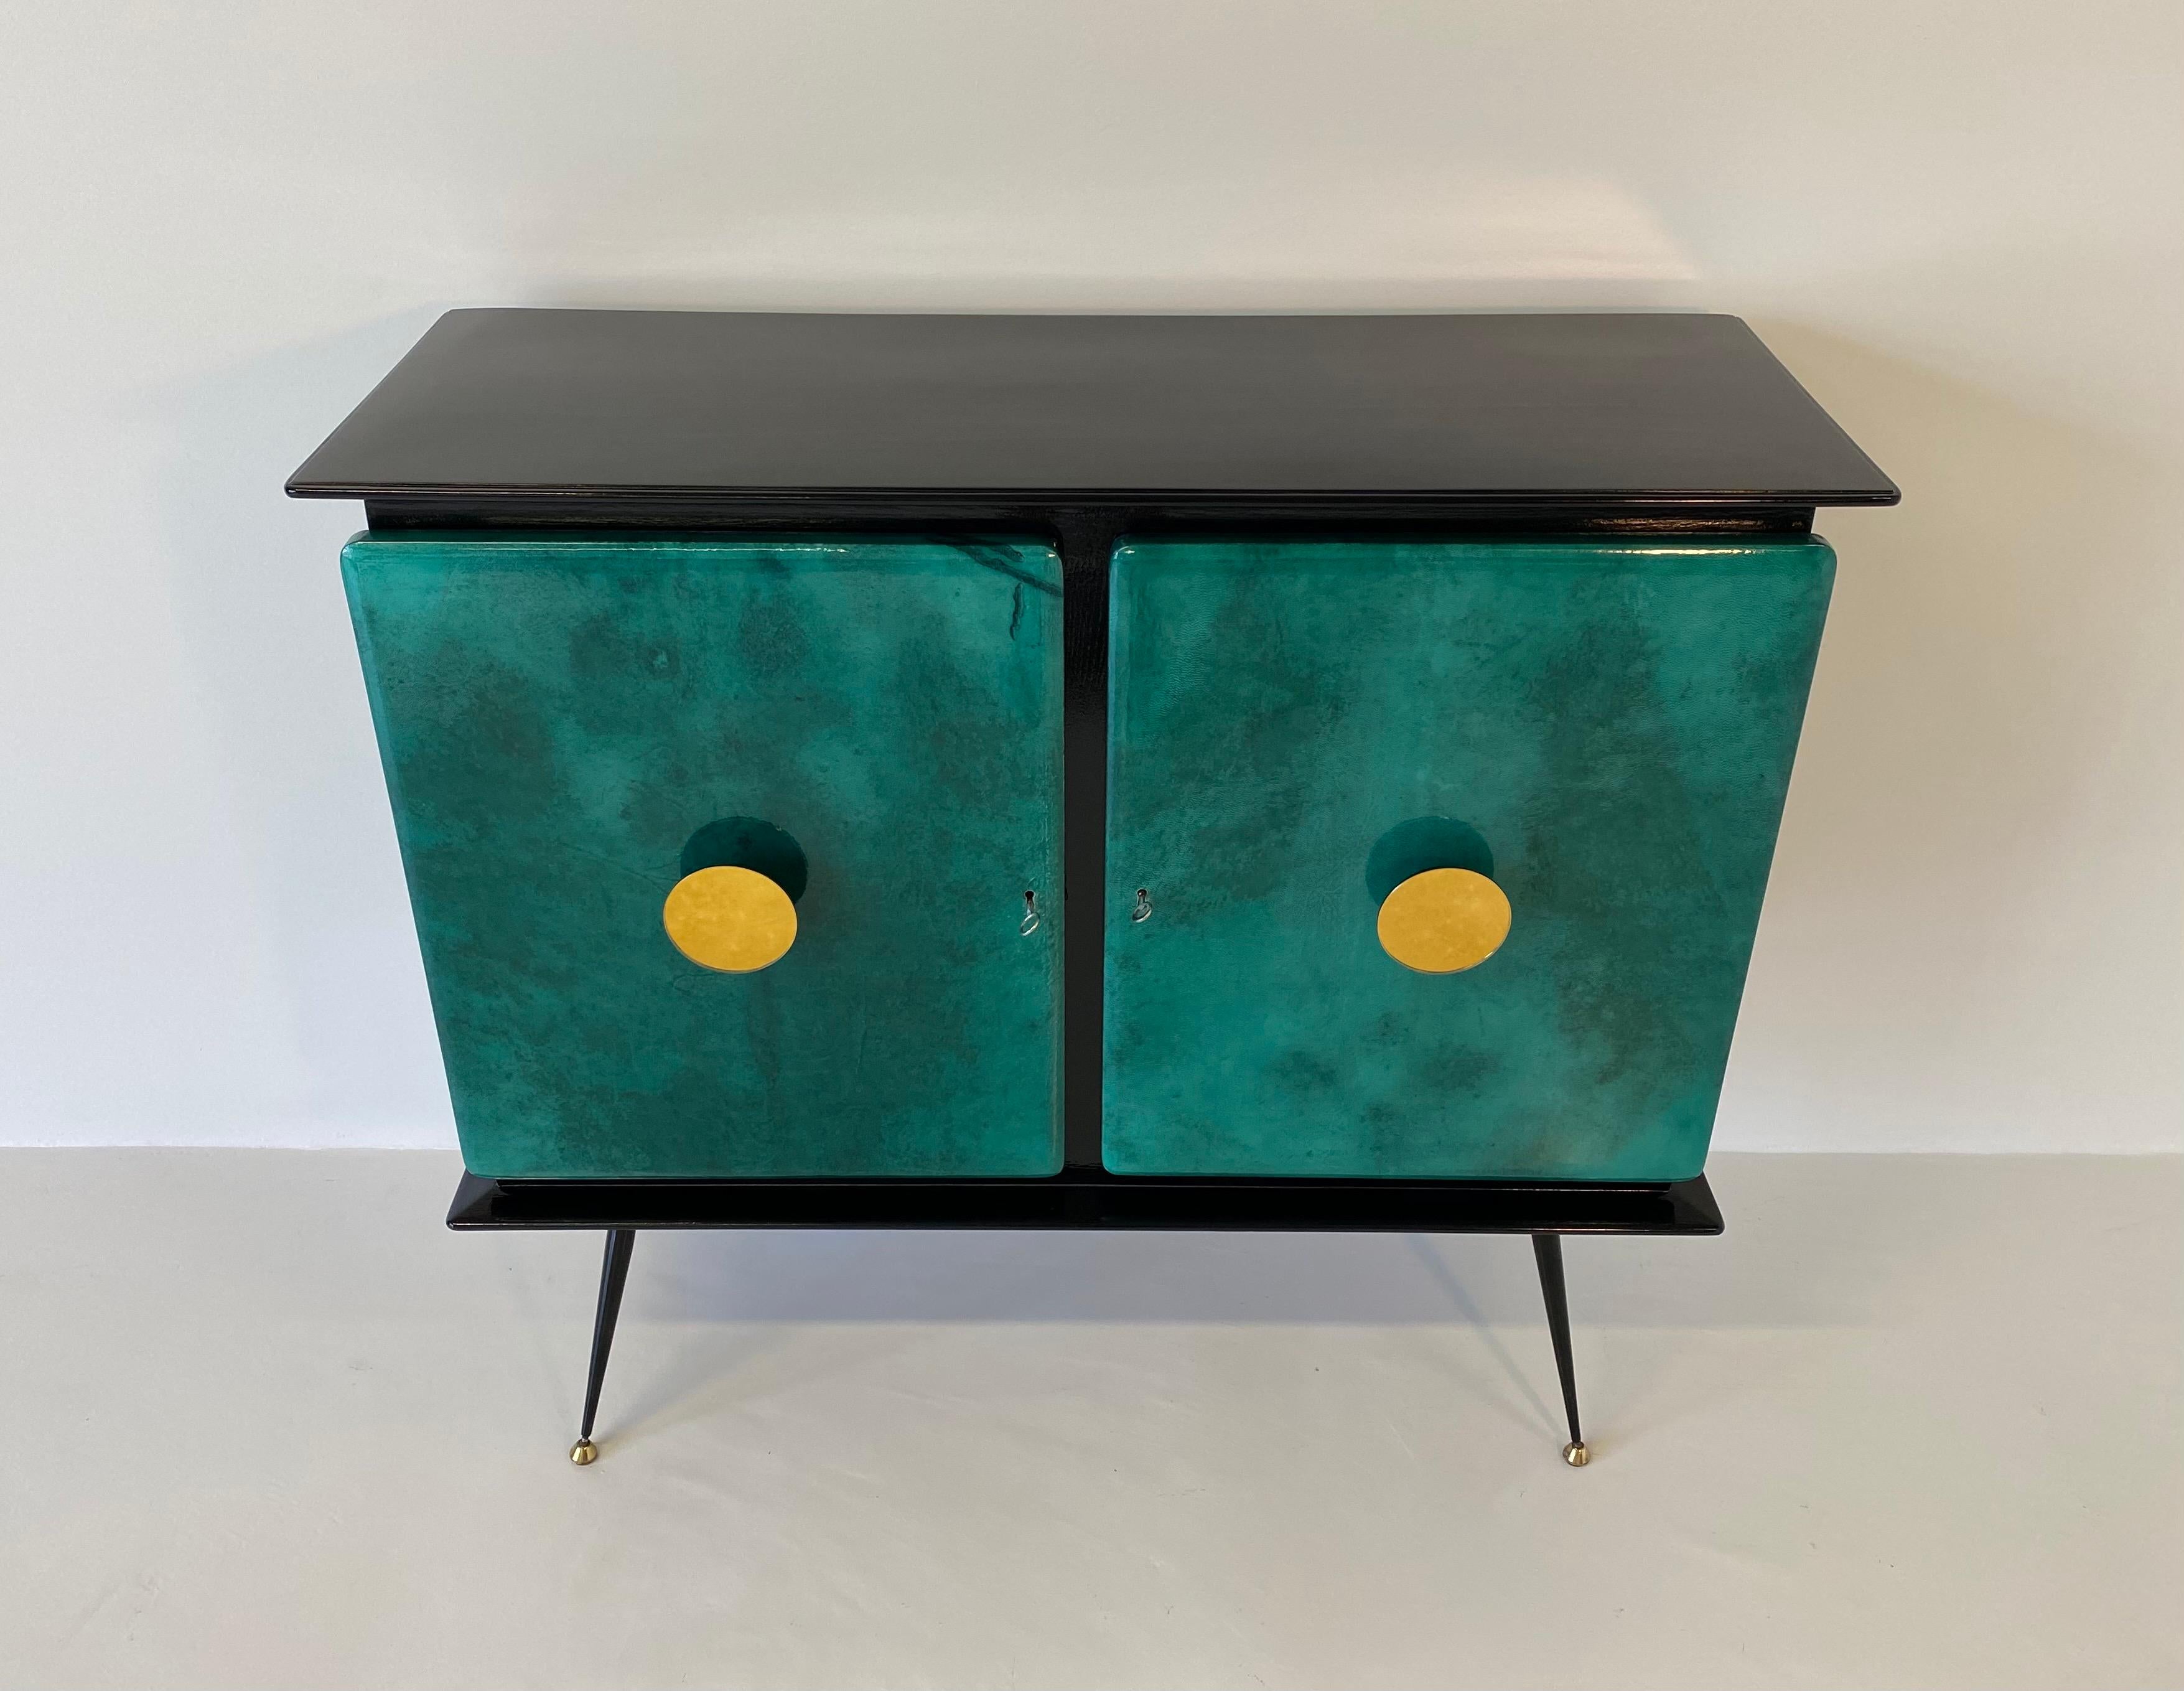 This mid-century bar cabinet was produced in the 1950s in Italy.
It is completely black lacquered with green parchment doors.
The handles are in gold mirror and the feet are in metal and brass.
The internal drawers are in maple while the